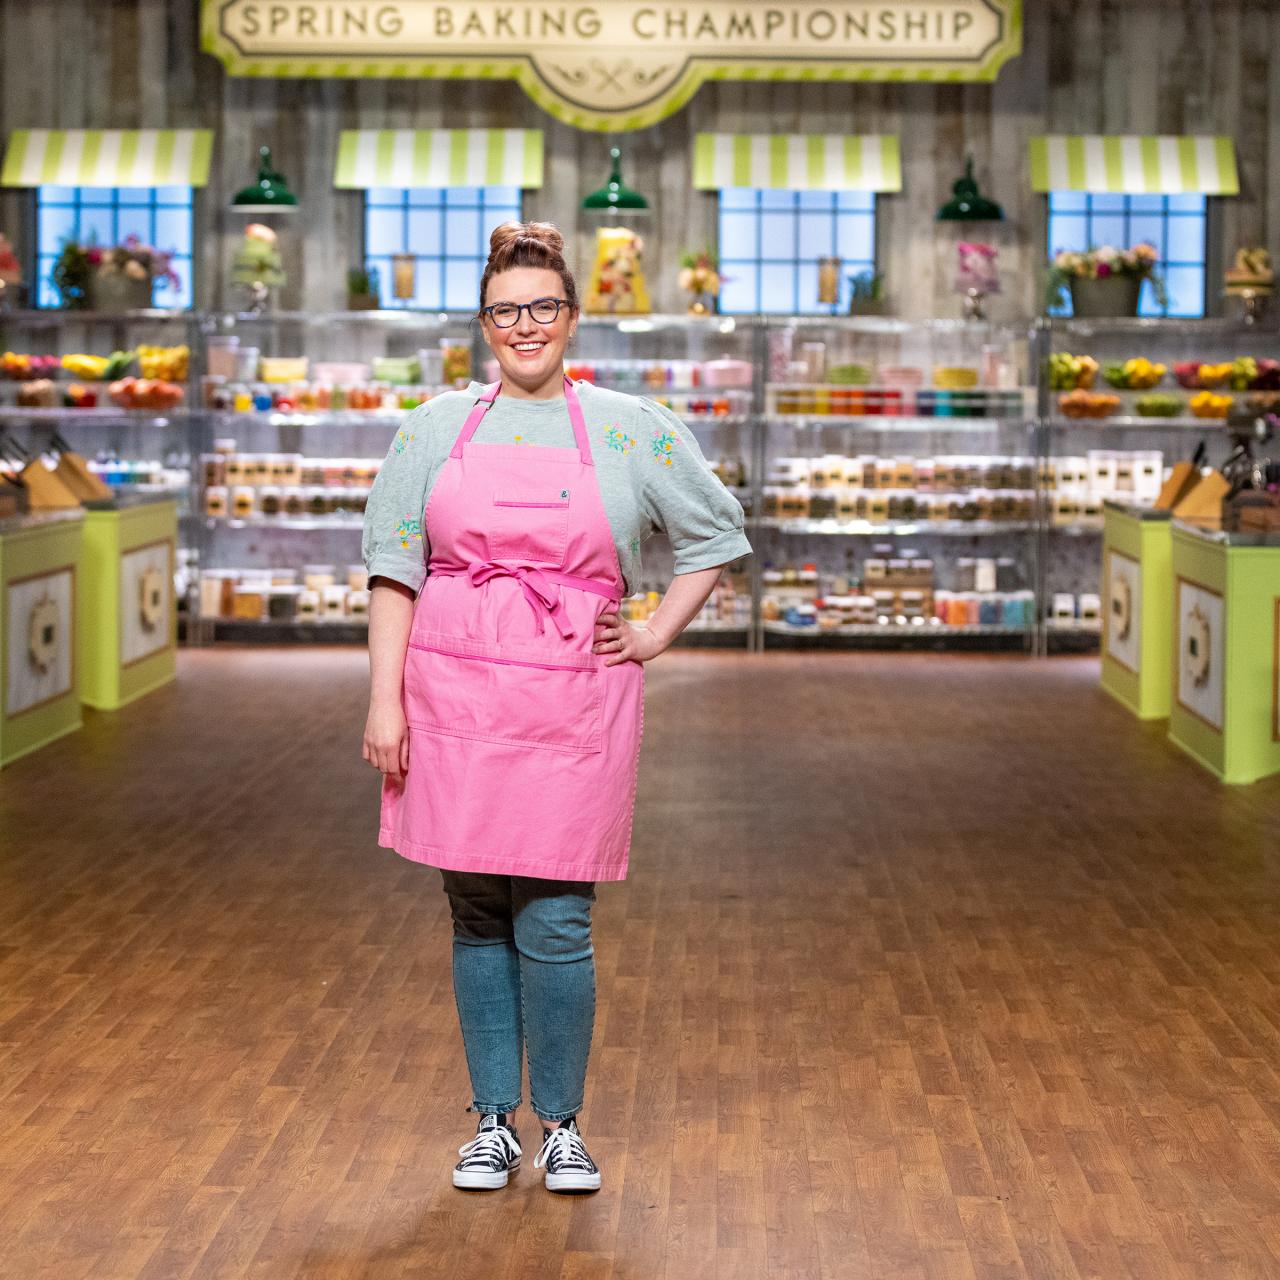 New Orleans chef vies for Spring Baking Championship's $50,000